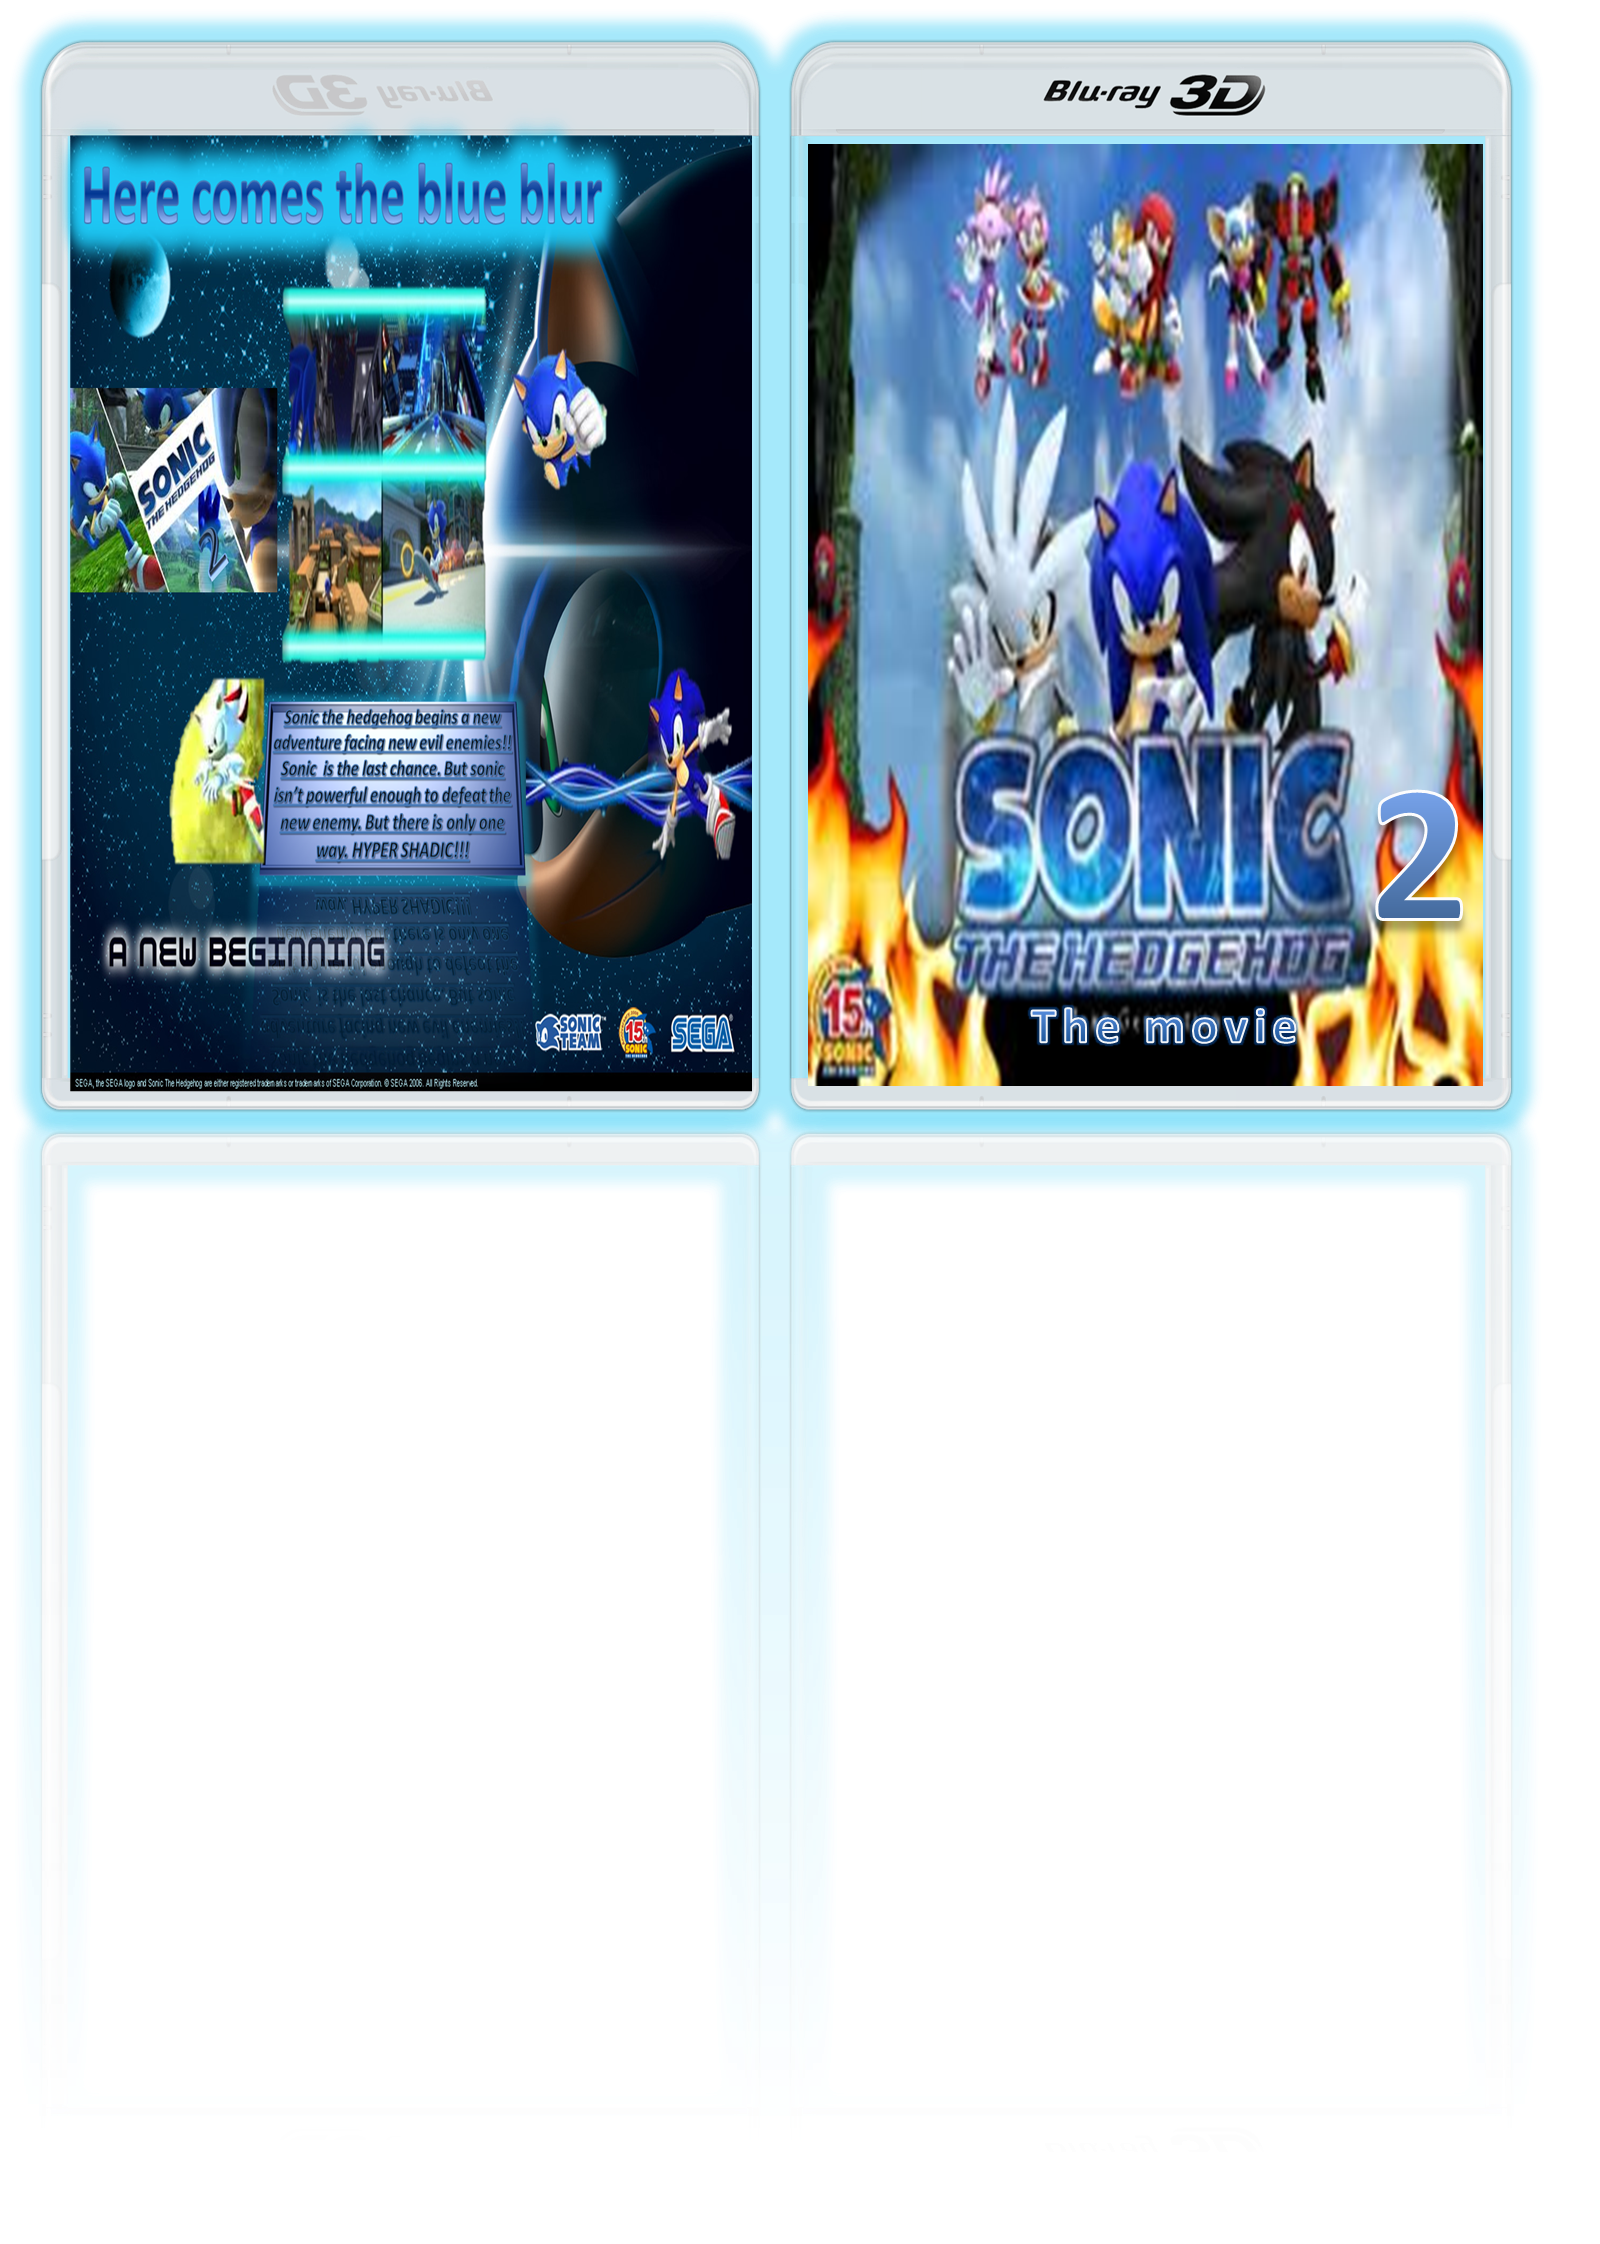 sonic the hedgehog 2 the movie box cover